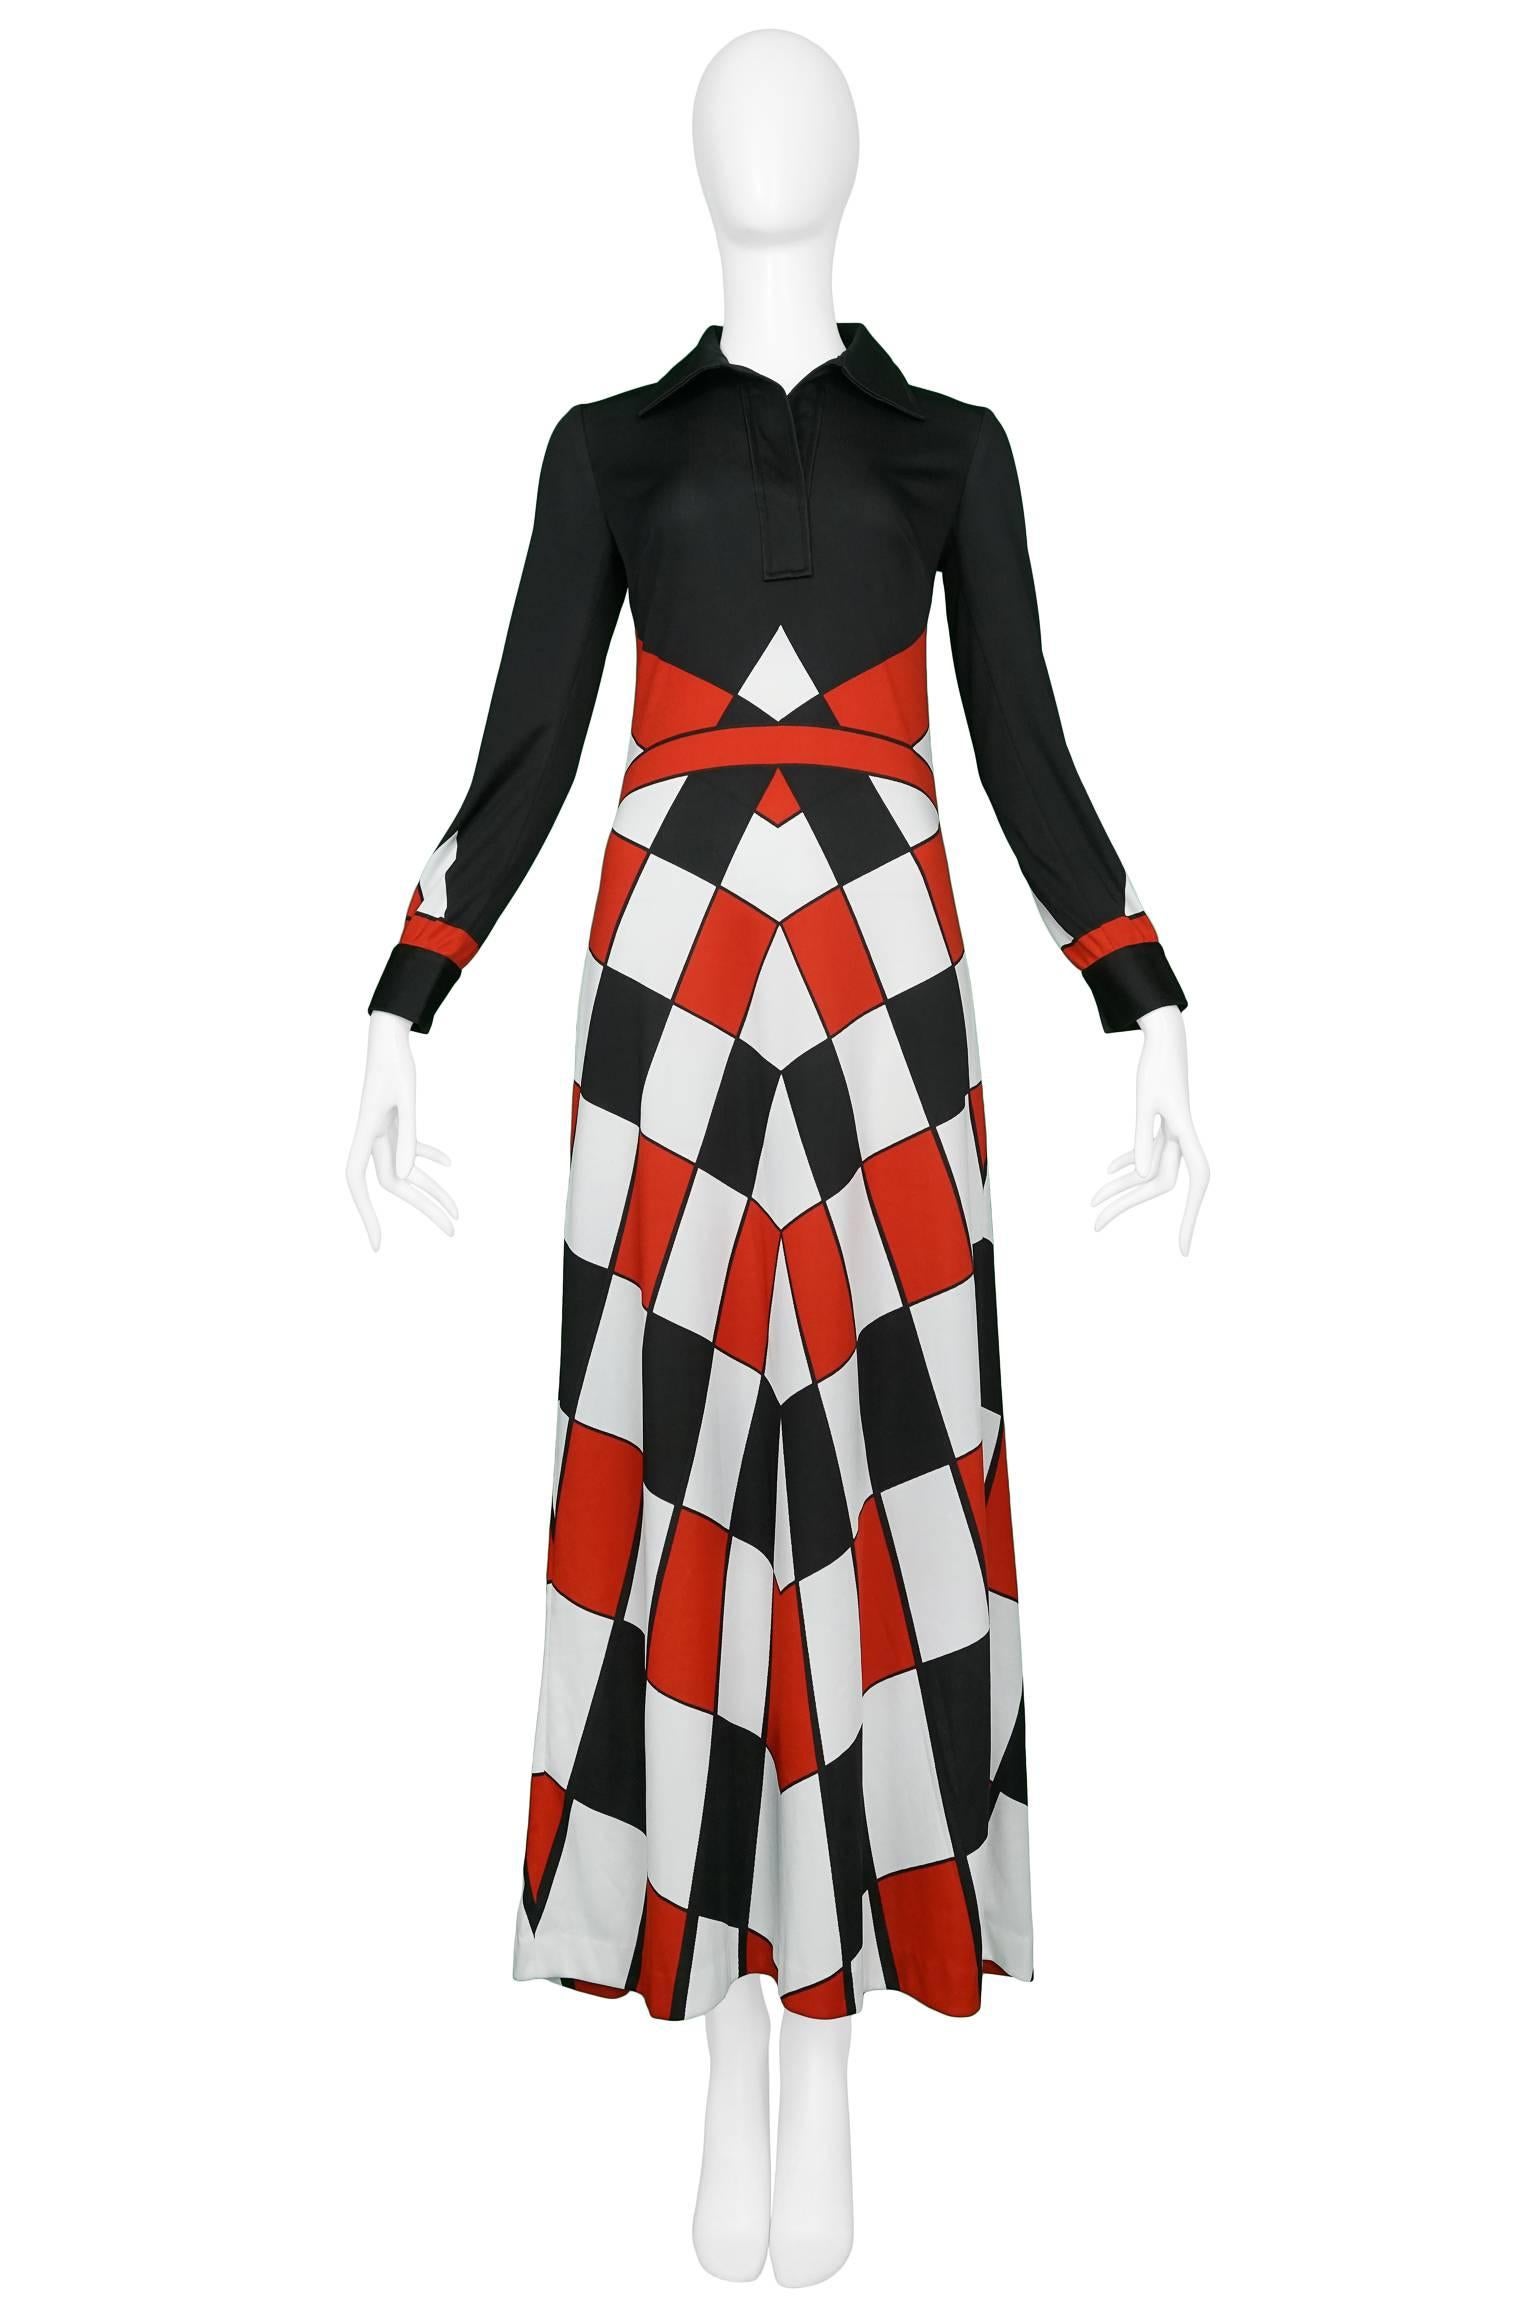 Vintage red, black and white Roberta di Camerino jersey maxi dress with sleeves. Dress features signature Roberta print and gold tone buttons. Roberta di Camerino archive sample dress. Circa 1970's.